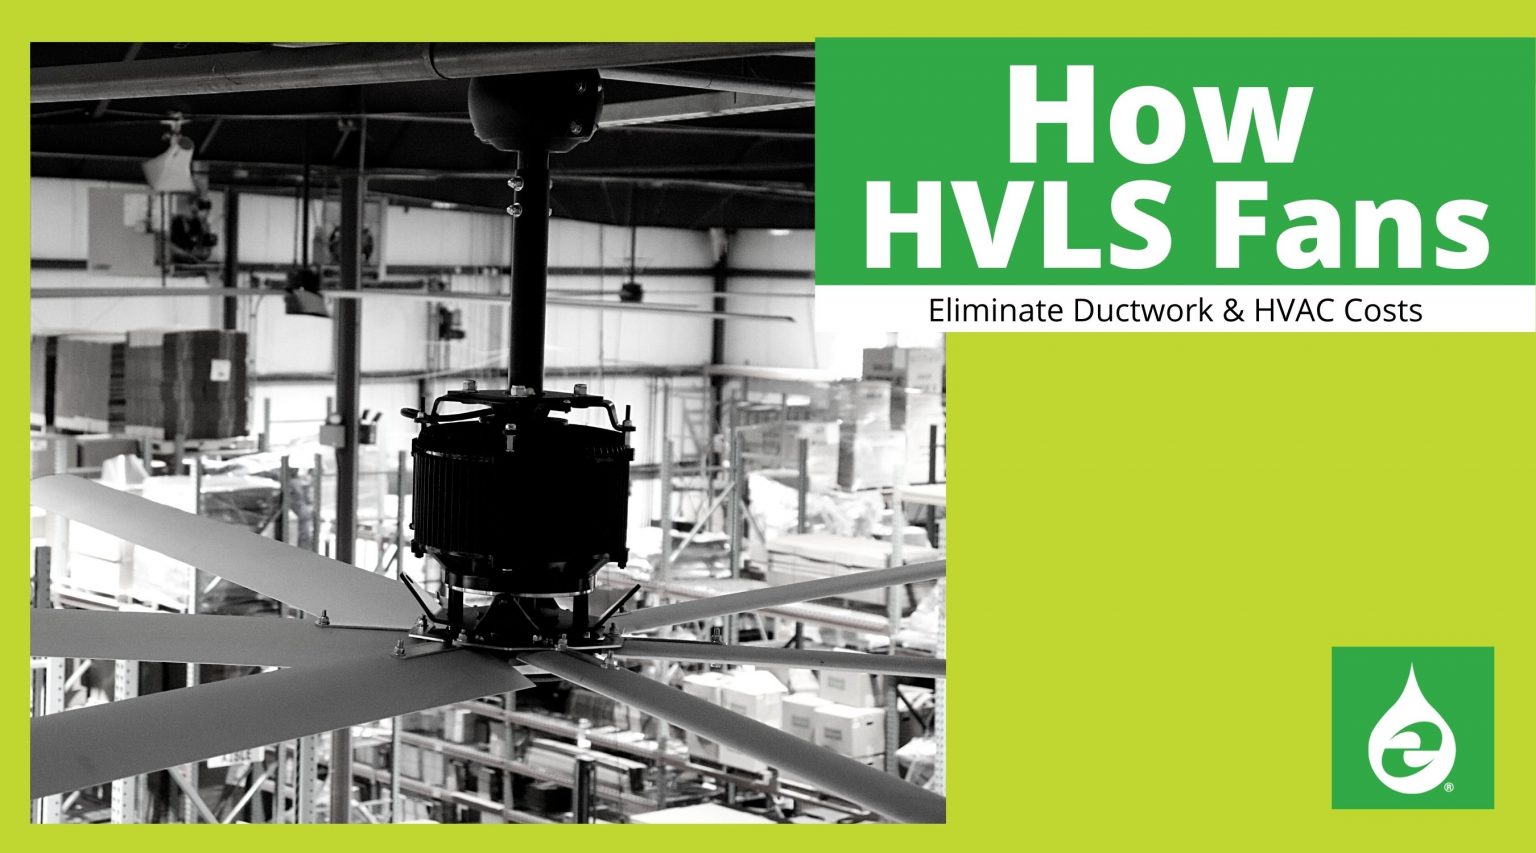 How HVLS Fans Eliminate Ductwork and HVAC Costs